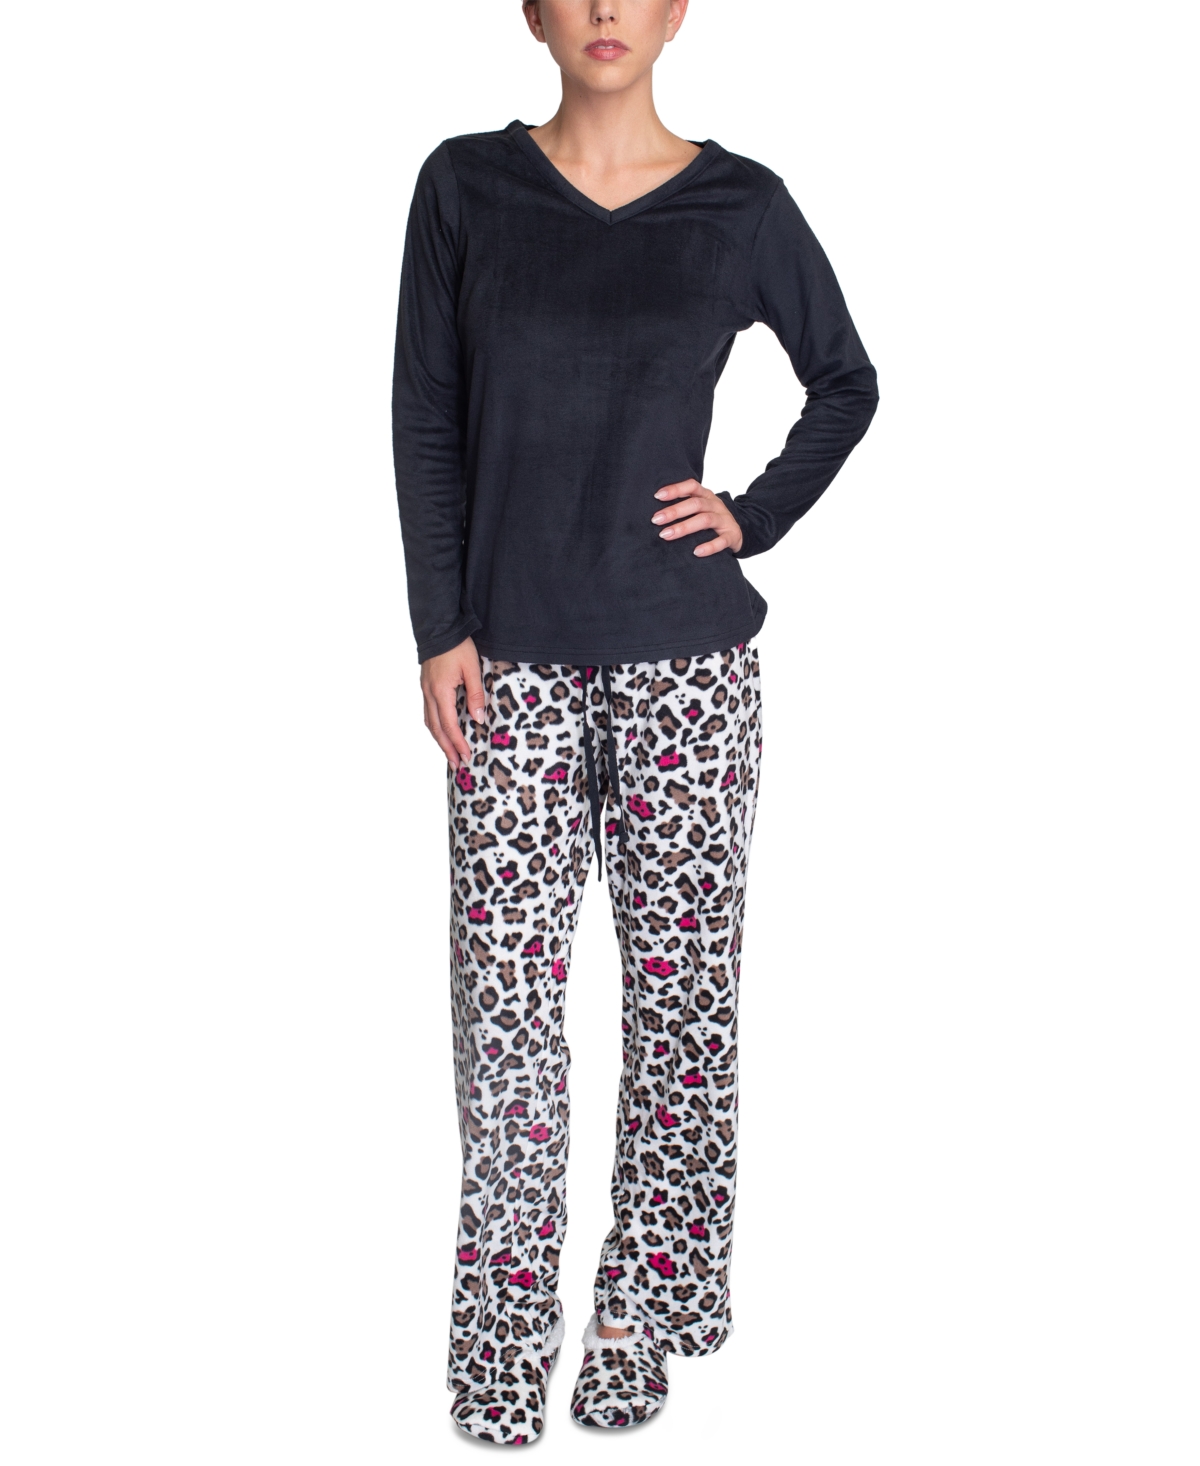 Goodnight Kiss Solid Top, Printed Pants & Faux Fur Slippers Pajama Set